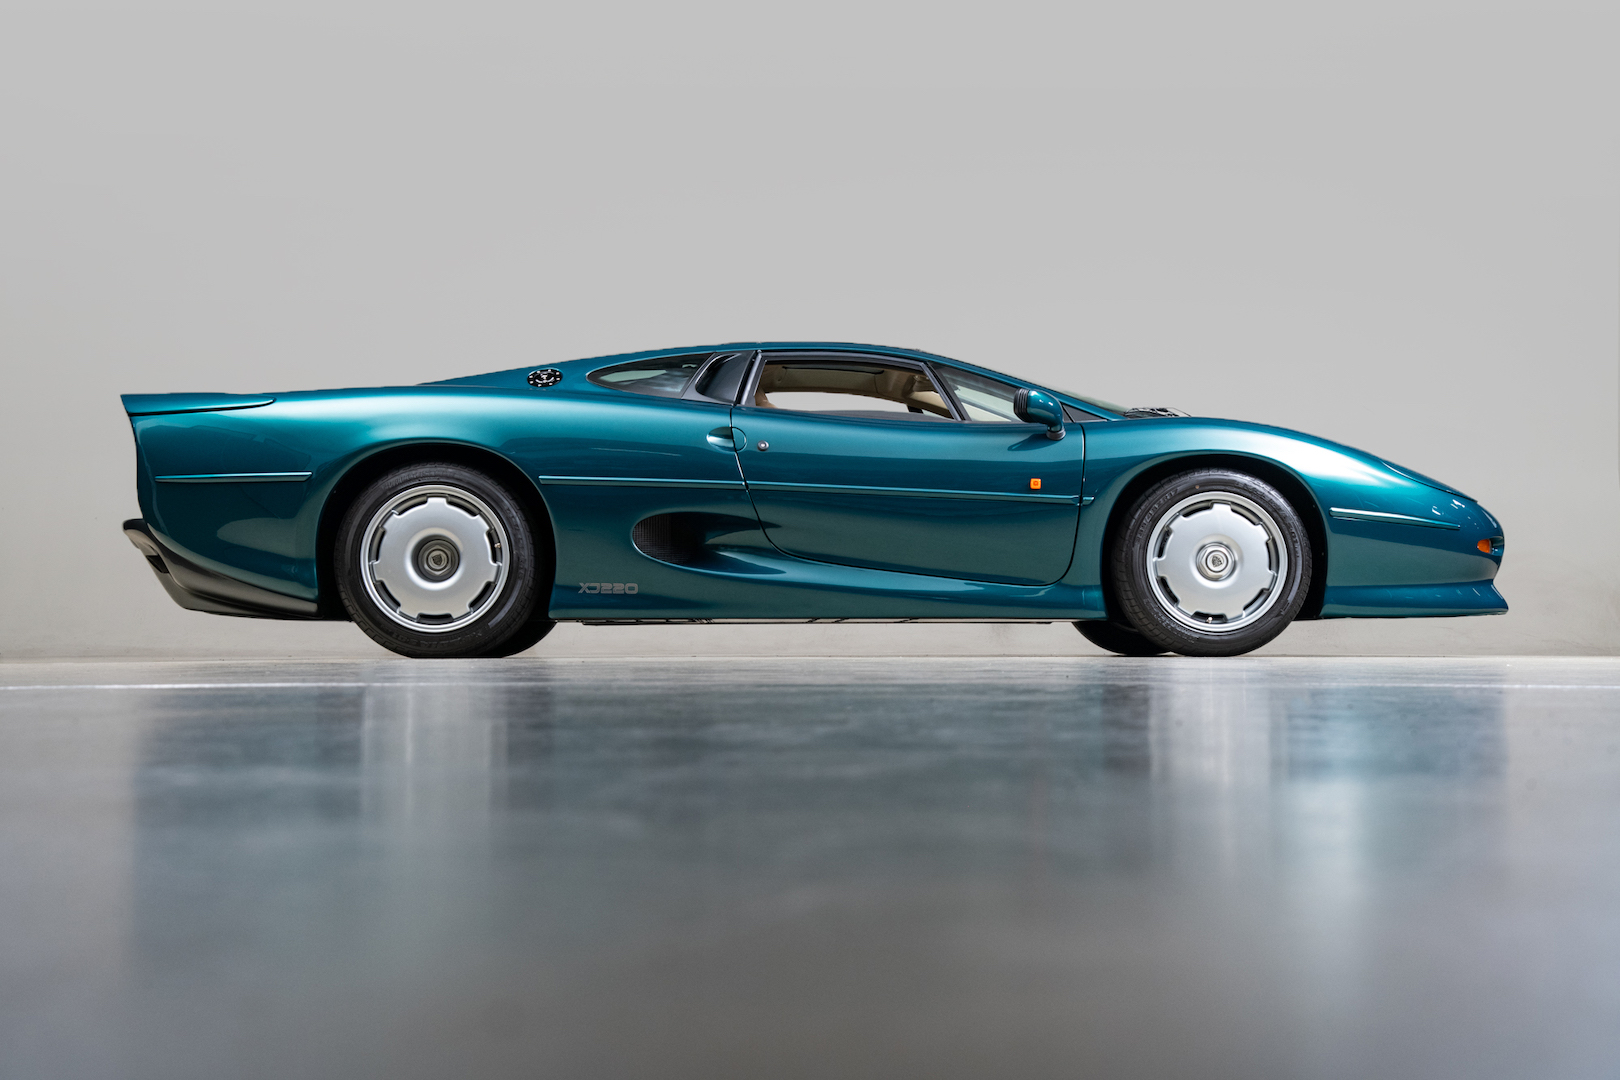 1994 Jaguar XJ220 with just 16 miles on its odometer